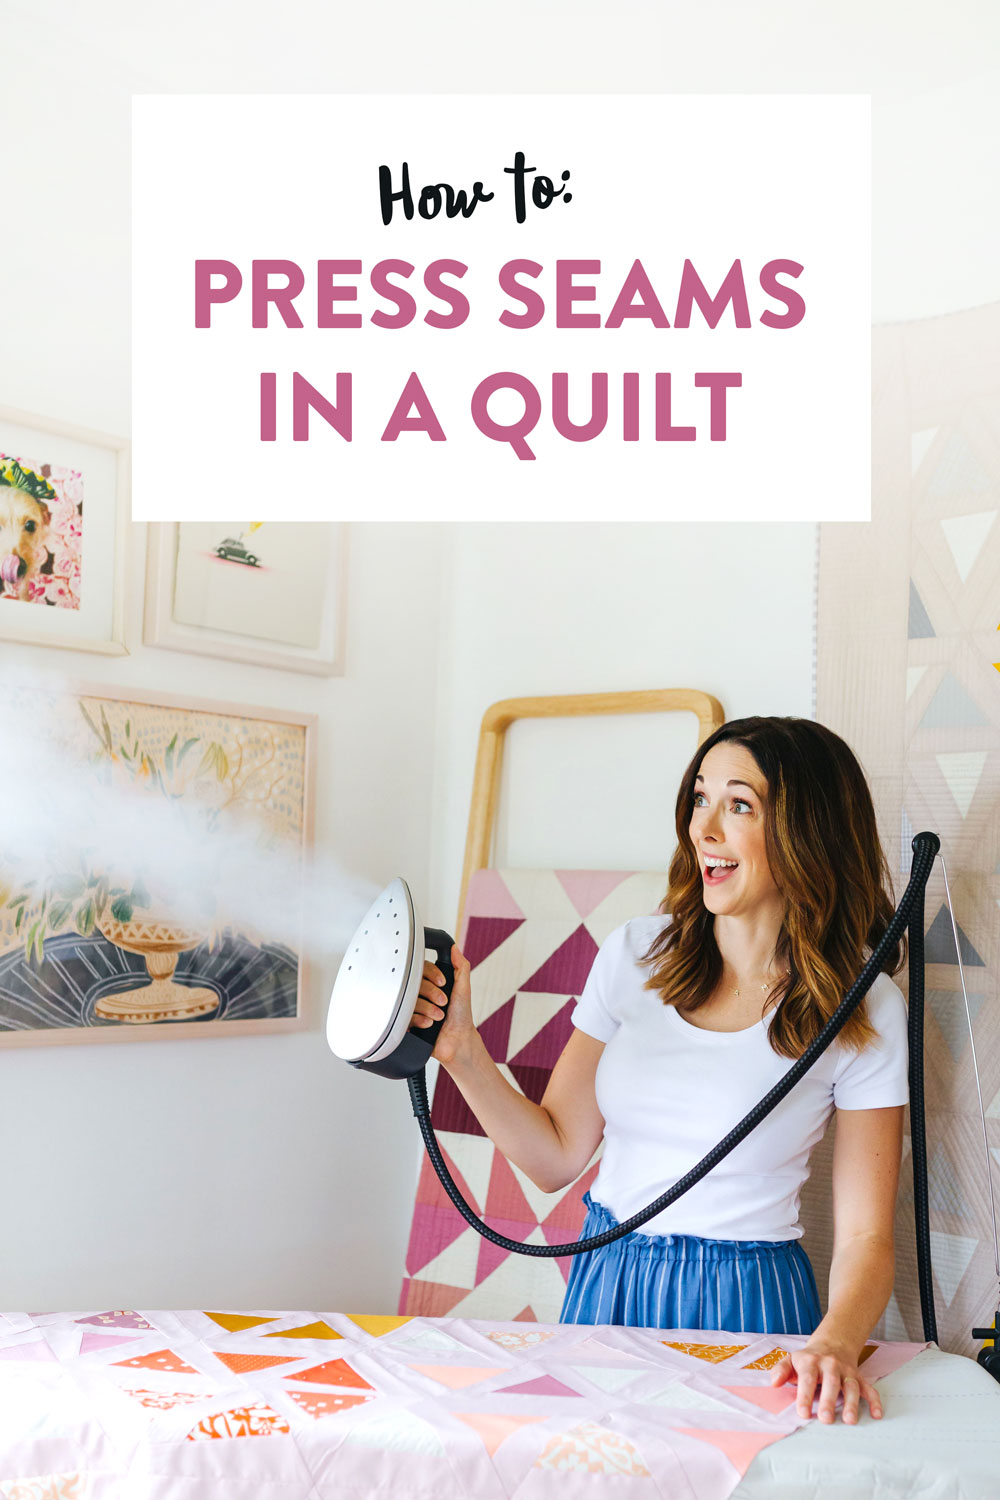 Learn how to press seams in a quilt. Included is a video tutorial and links to the best tools to use. suzyquilts.com #quilting #suzyquilts